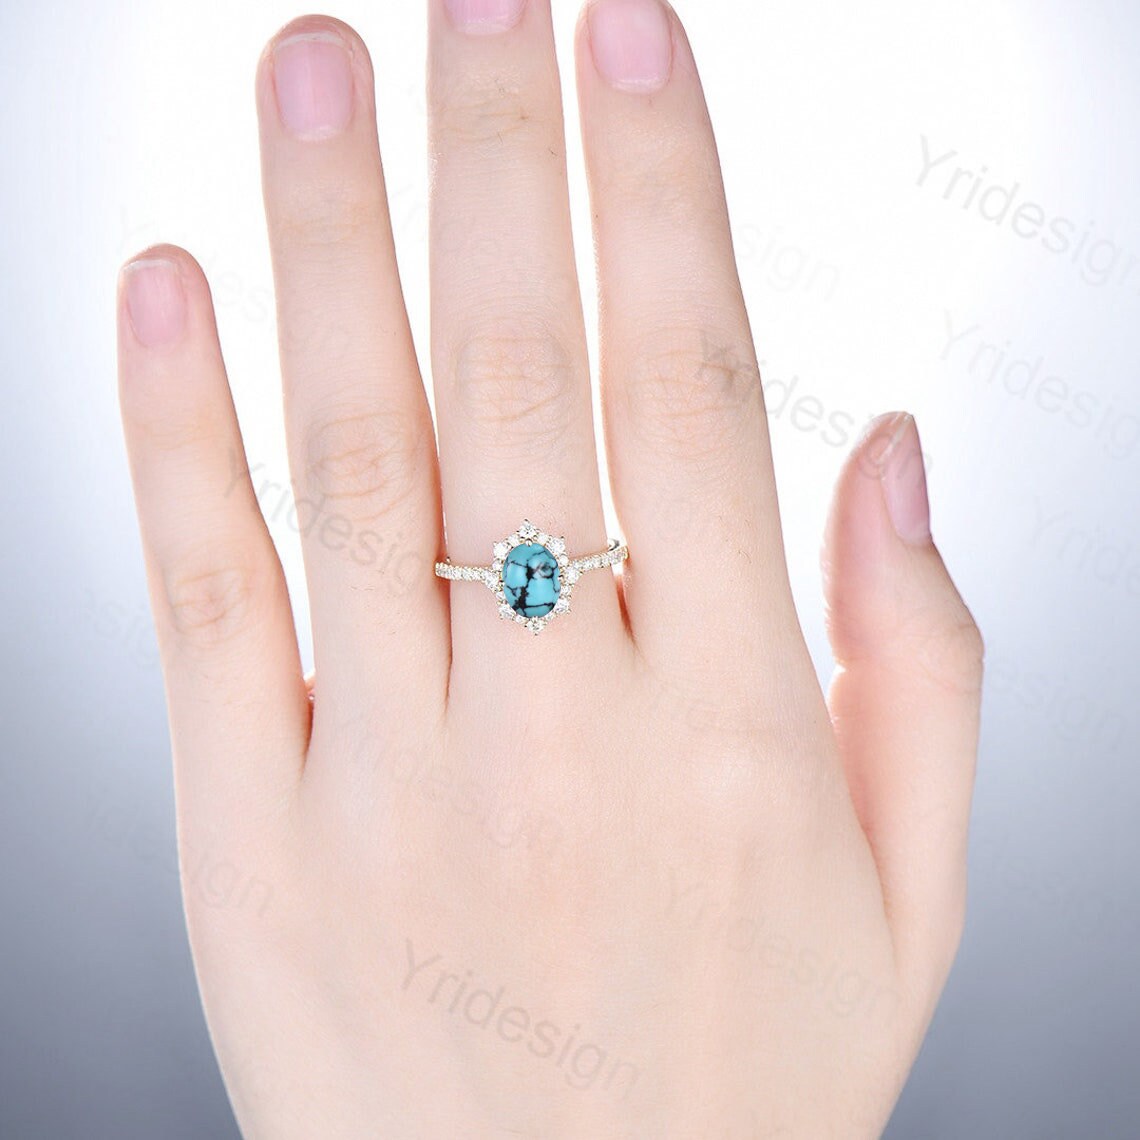 Vintage turquoise engagement ring halo moissanite oval turquoise rings for women December birthstone ring bridal wedding promise ring - PENFINE